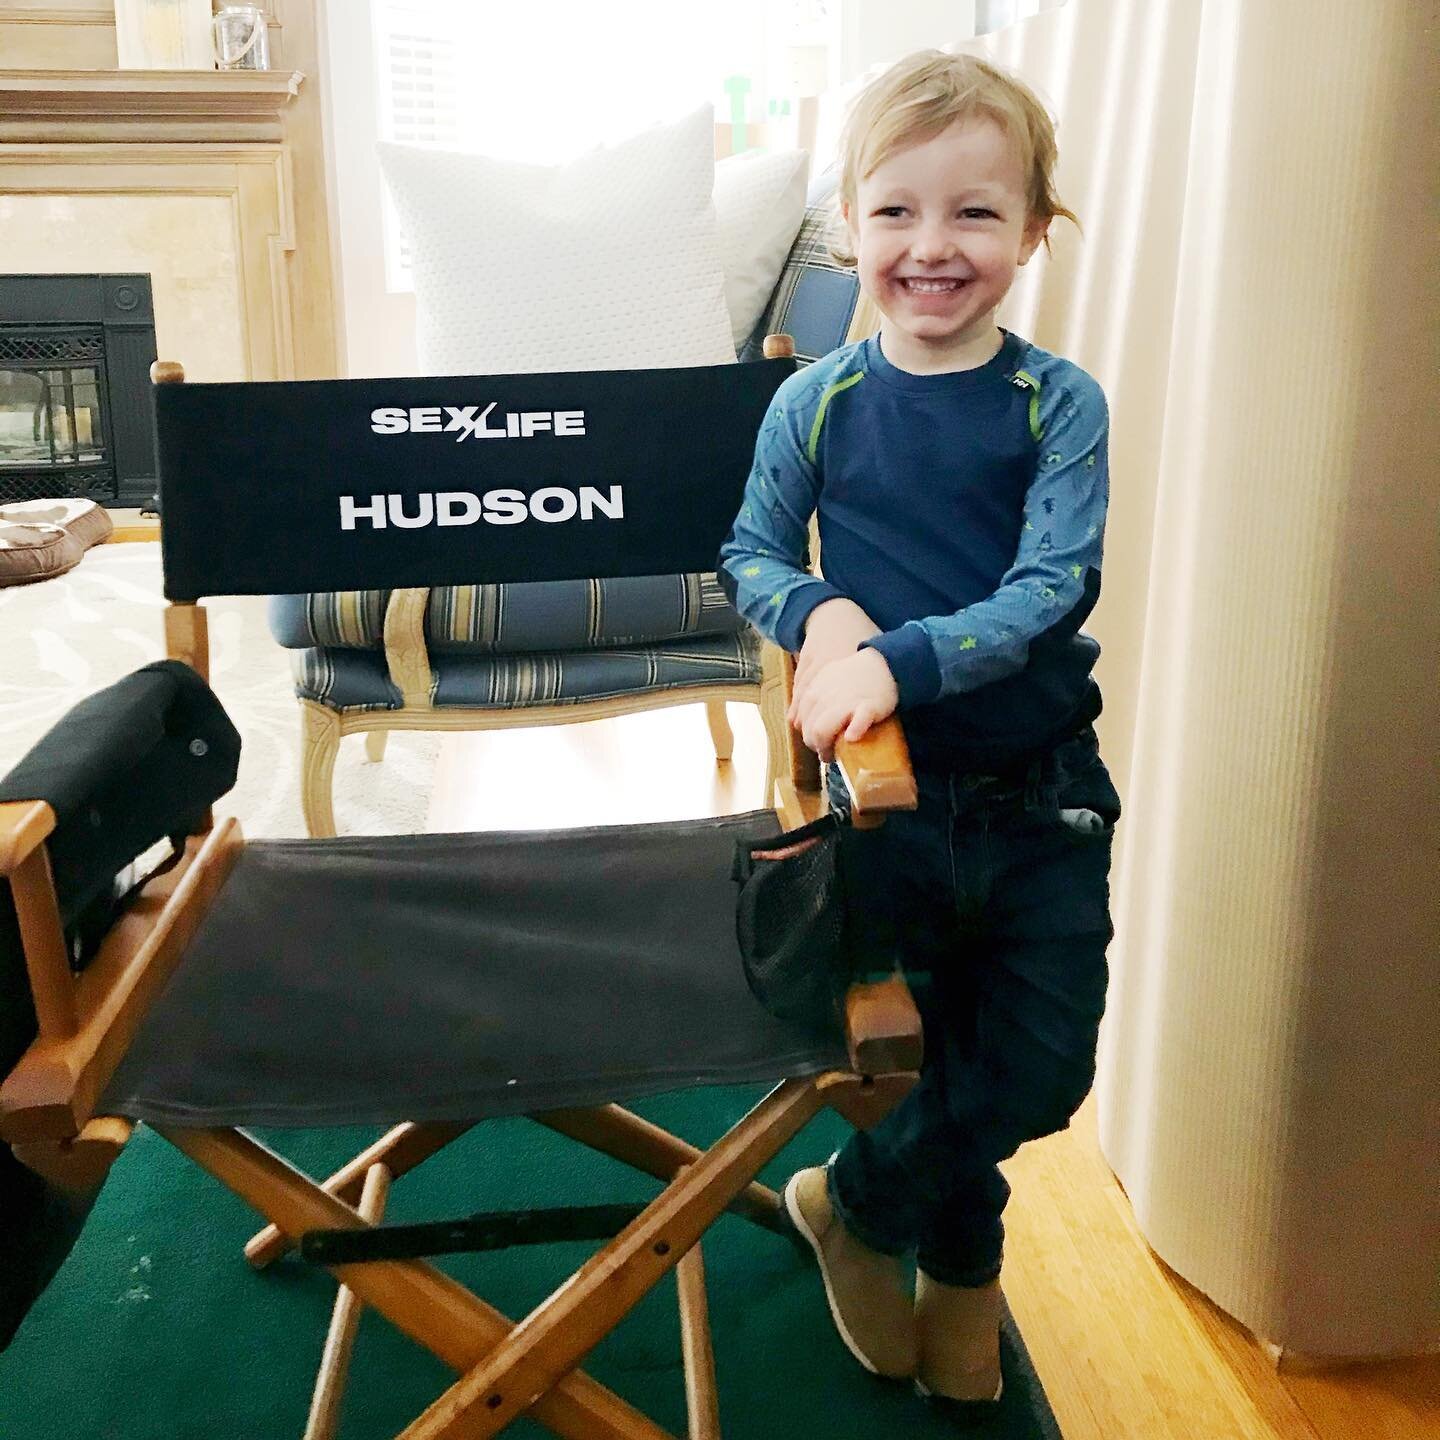 I got this chair on set. Did you know it had pockets!? I liked to put my water bottle there and trucks. I had toys to play with on set! Legos and dinosaurs! I even got to keep some when we wrapped! #onset #onsetlife #actorslife @sexlife #childactor #